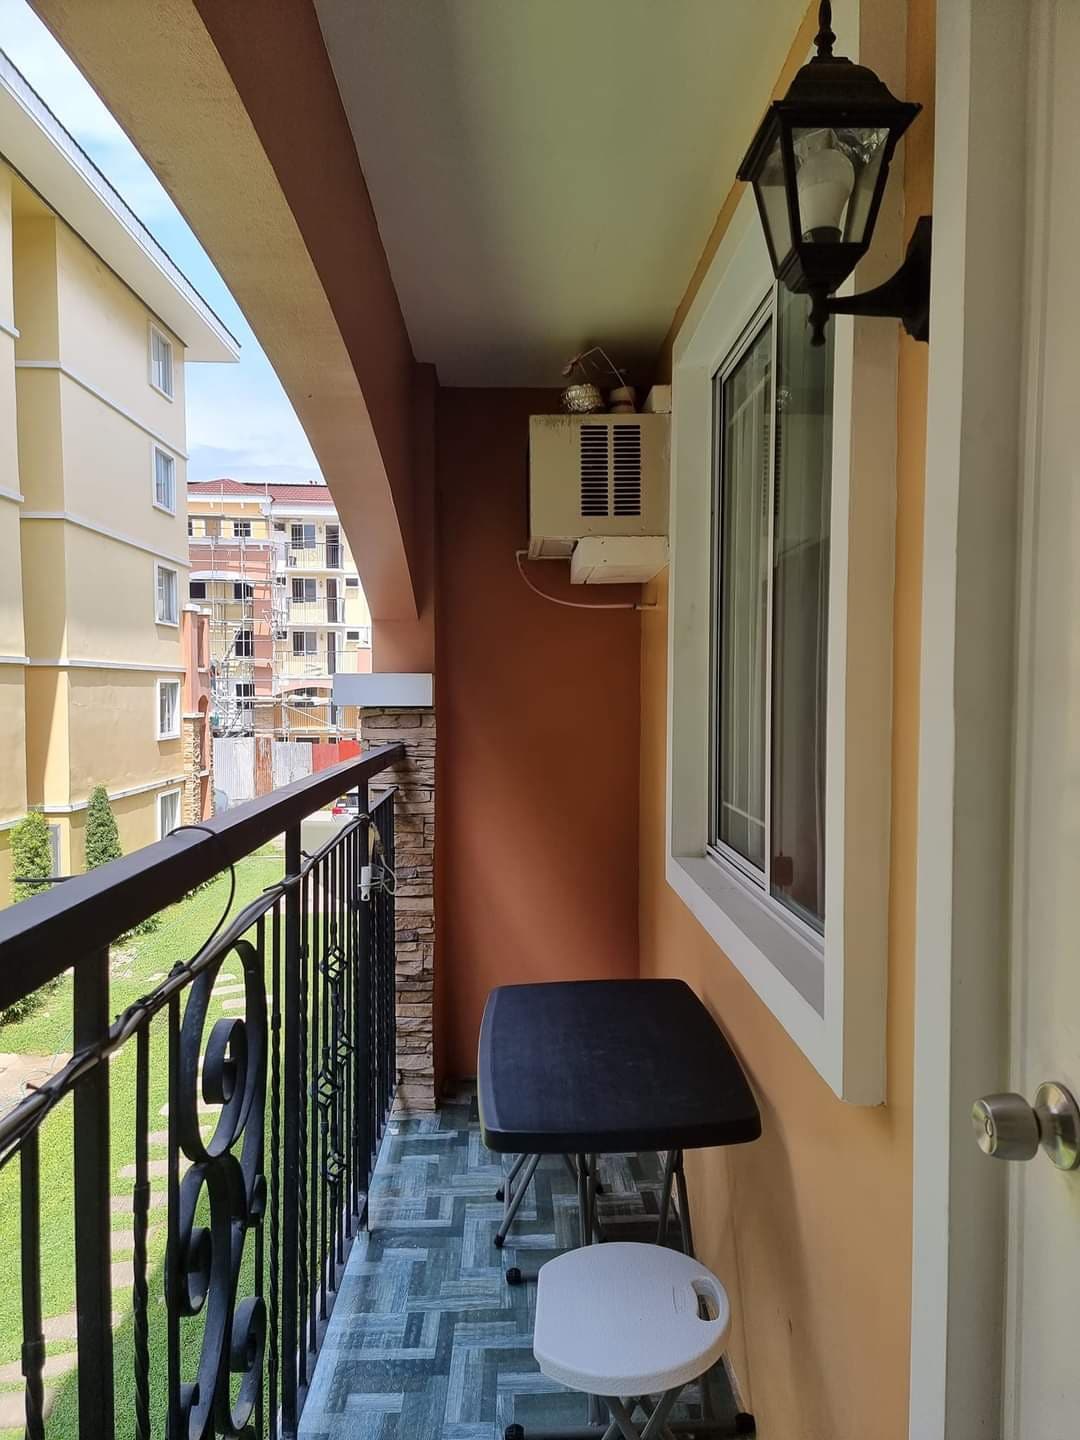 1 bedroom fully furnished Arezzo Condo